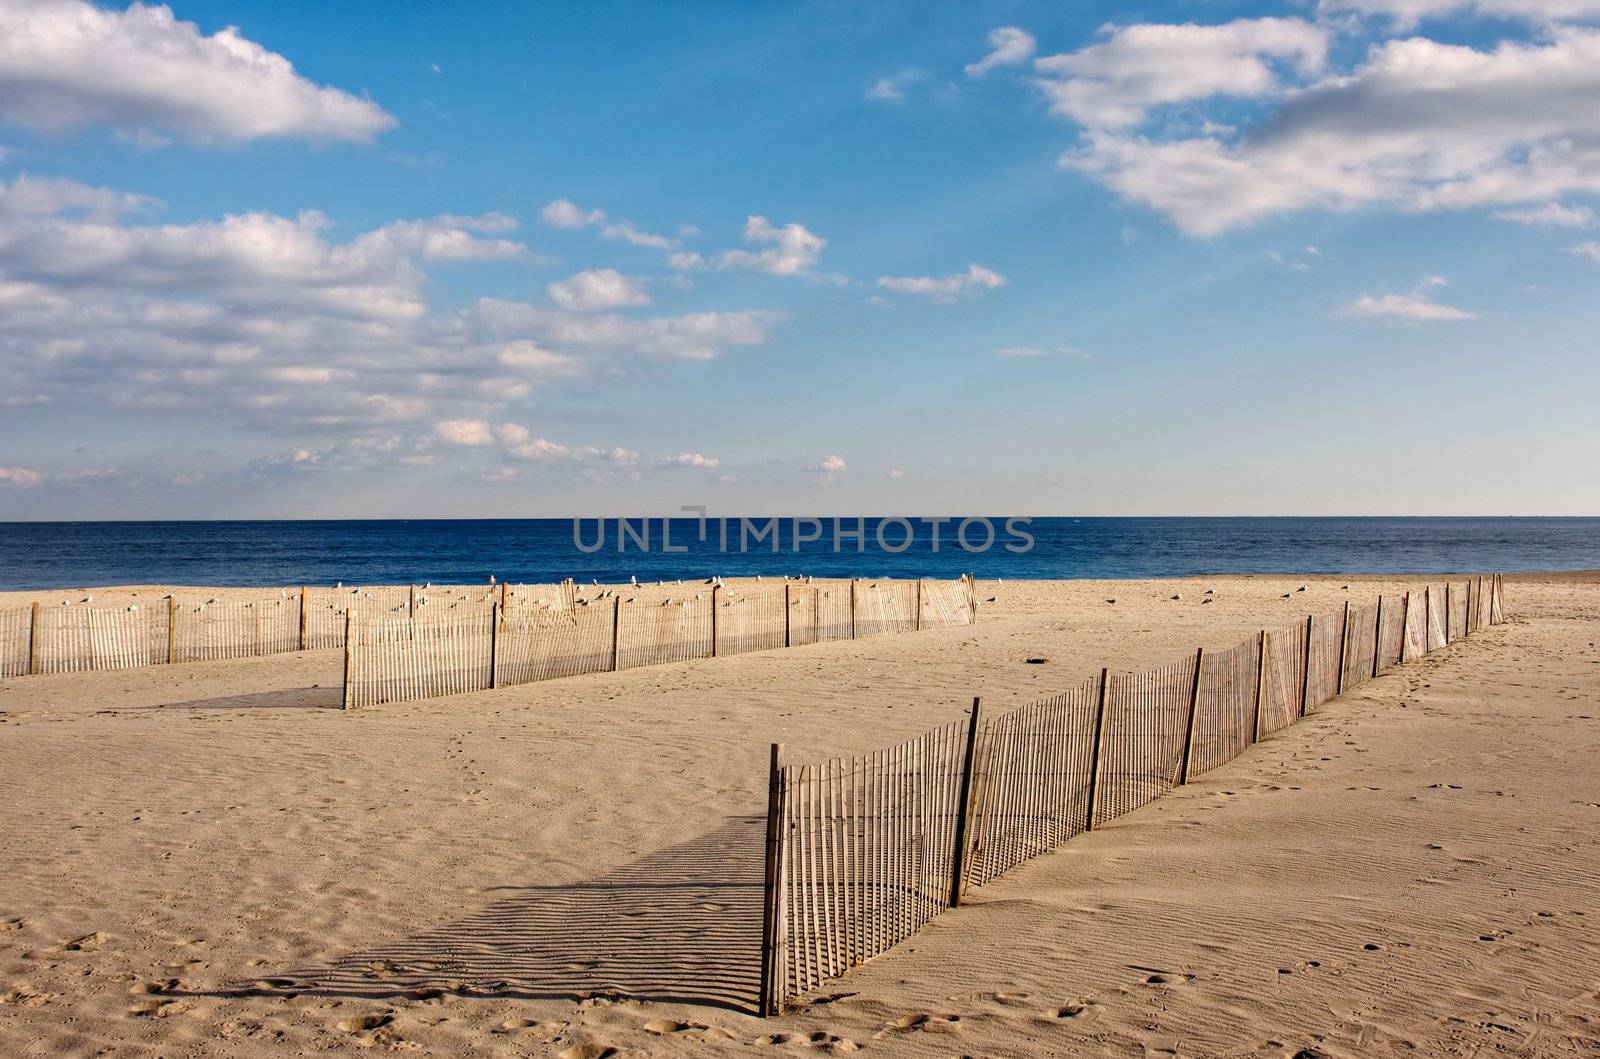 Wooden fences on the beach, The fences are on the sand in the foreground with the ocean and sky above.